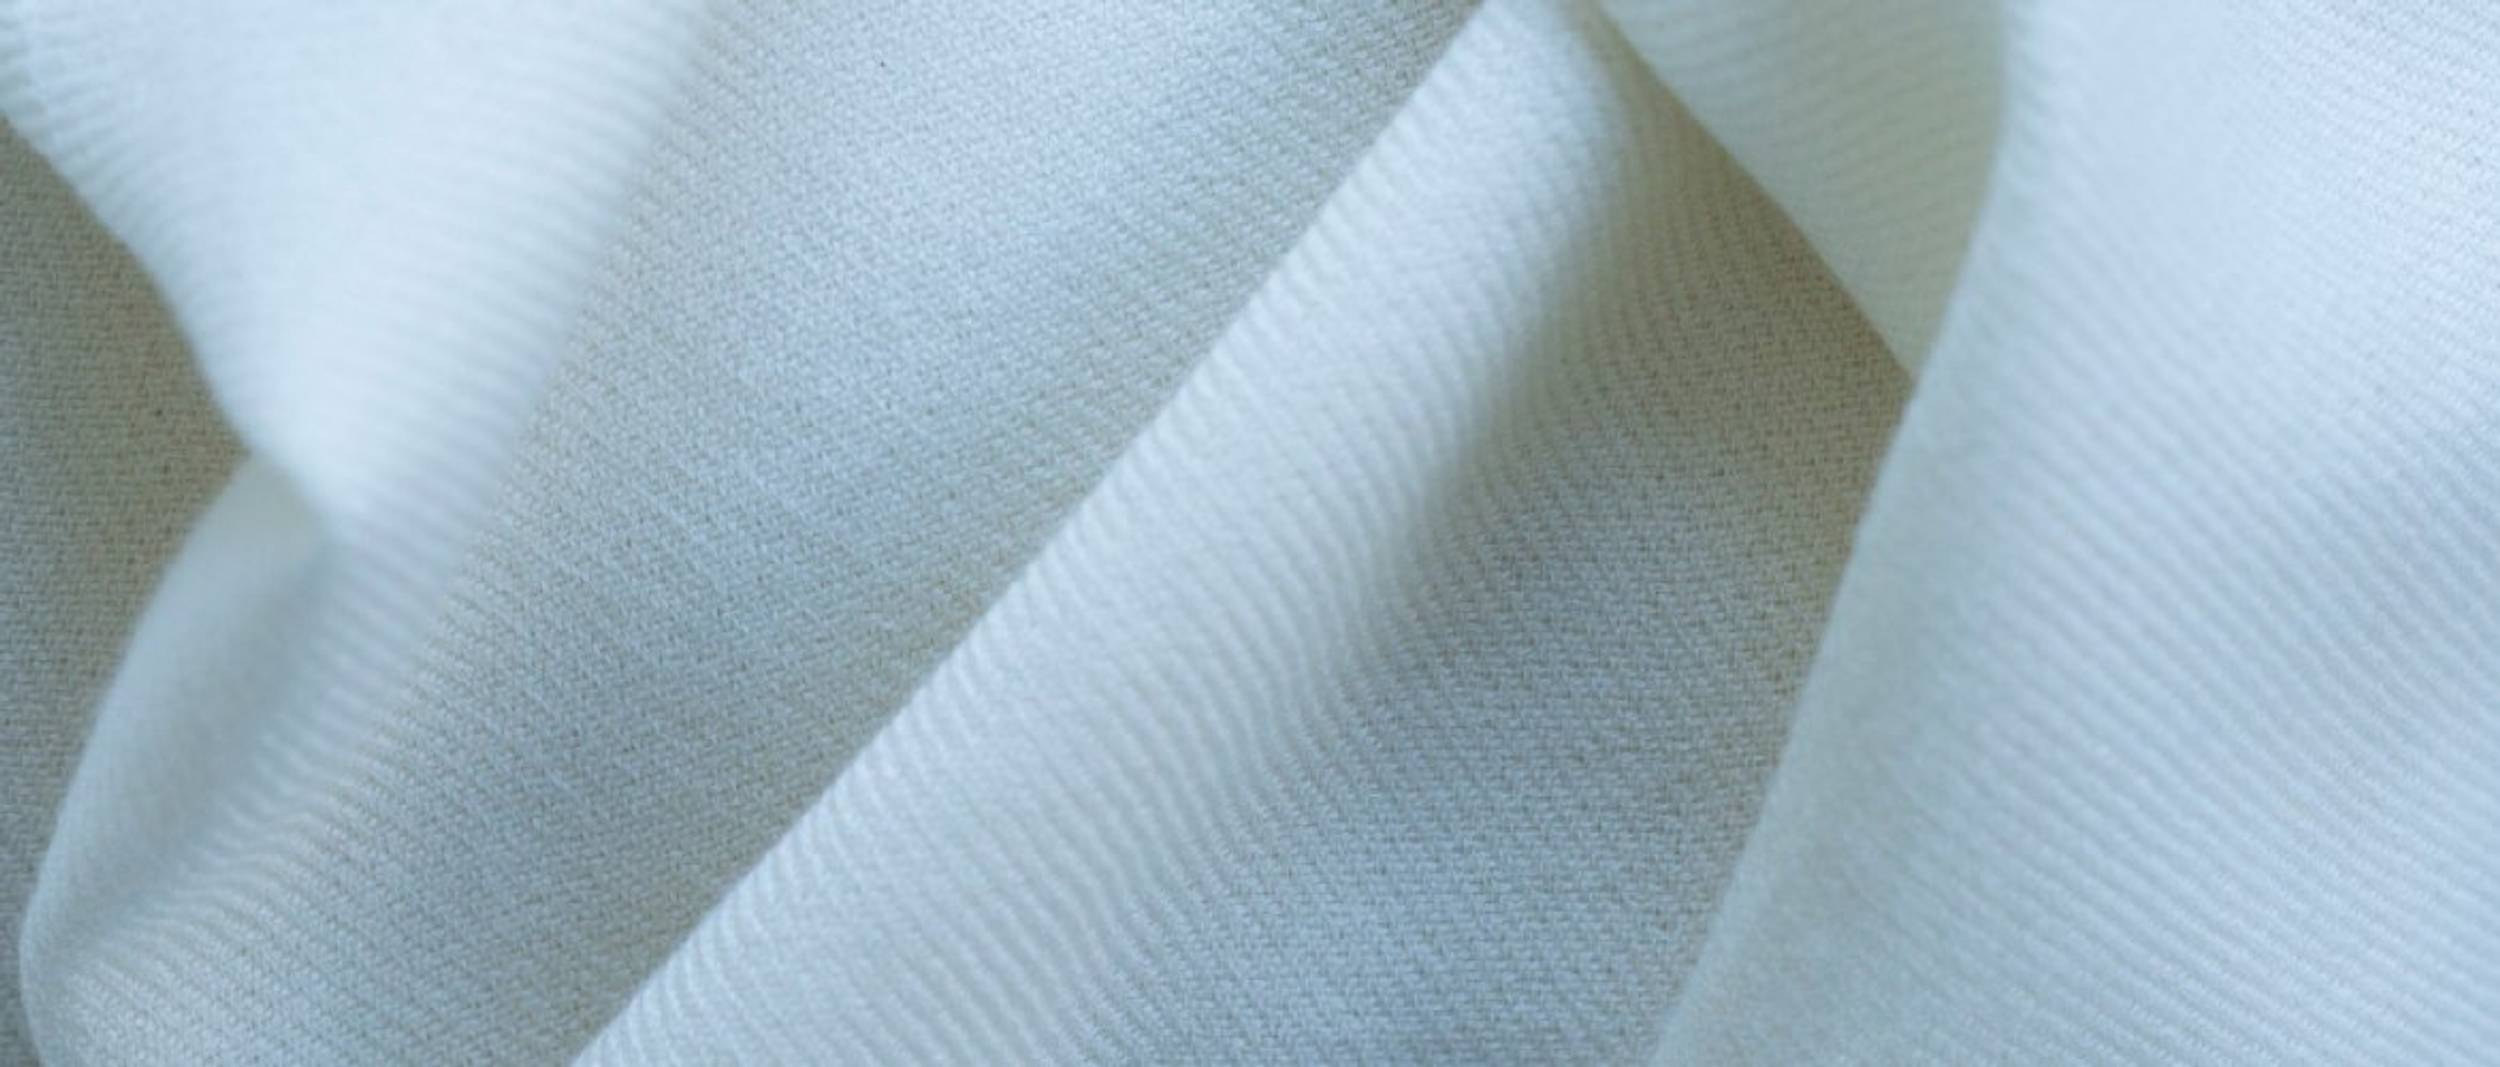 The Differences Between 100% Cashmere and Cashmere-Blend Fabrics